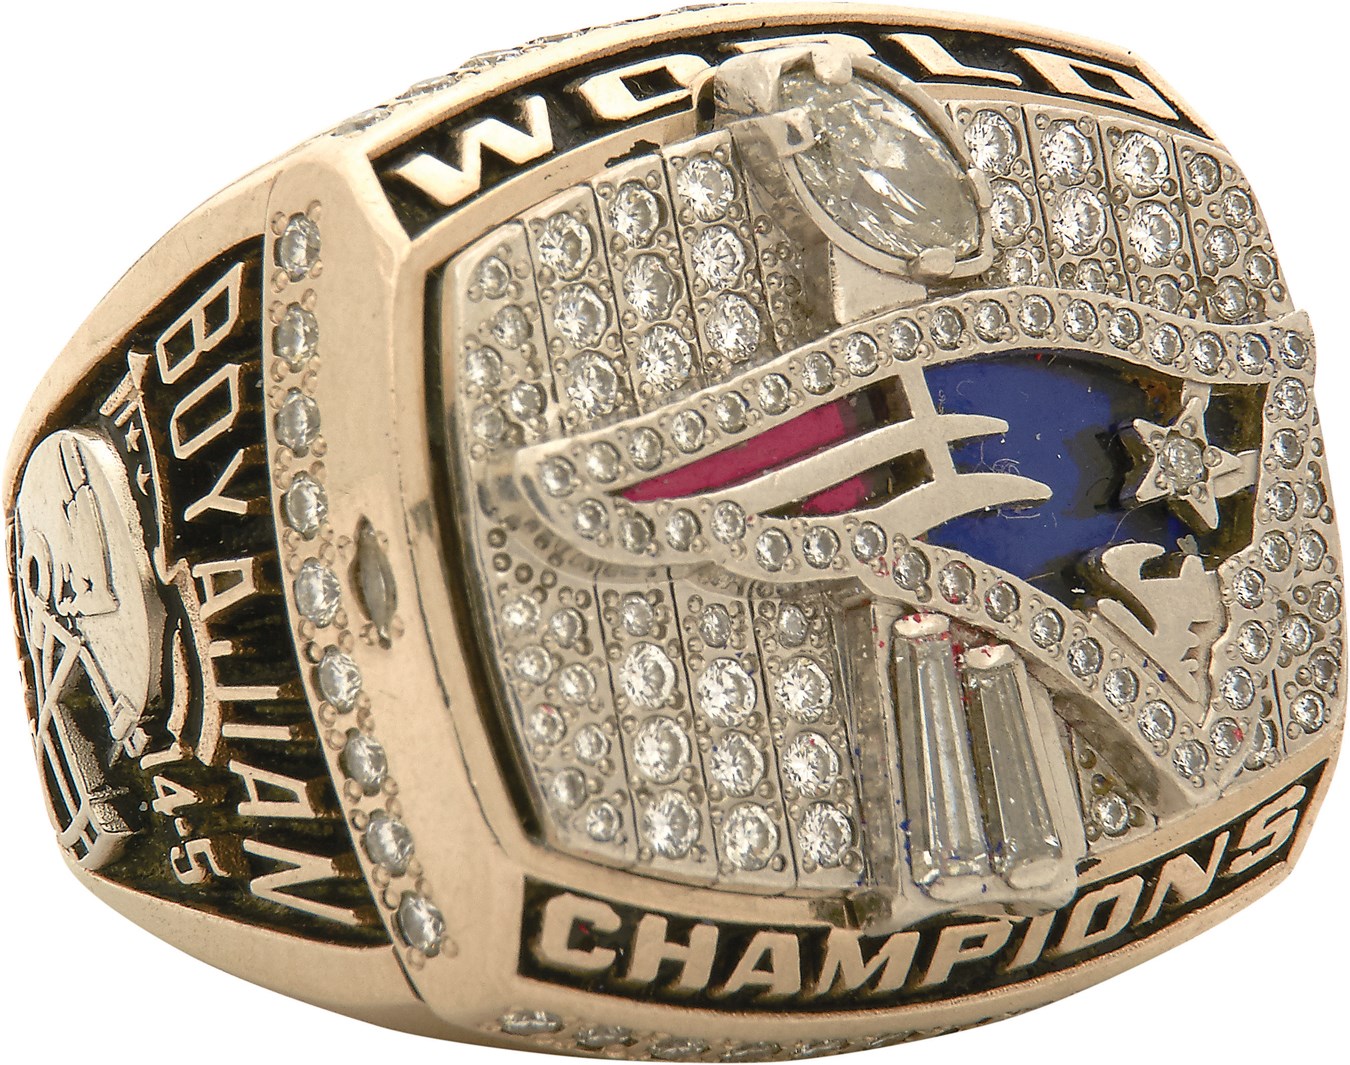 - 2001 New England Patriots Super Bowl XXXVI Championship Ring - Presented to Long-Time Team Employee